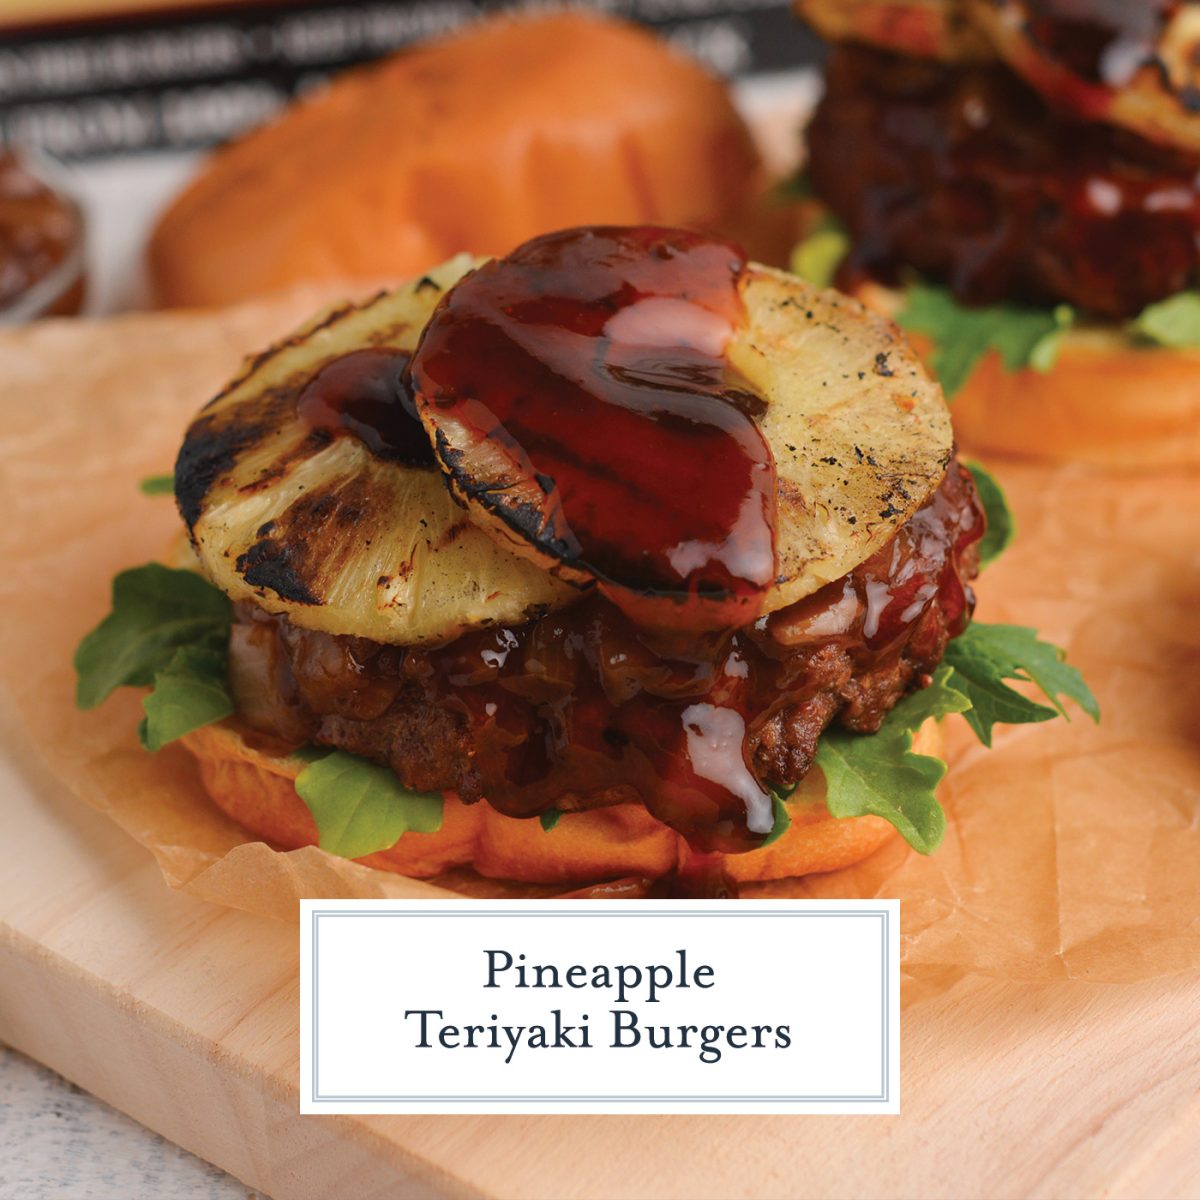 close up of a burger with grilled pineapple, teriyaki sauce, greens and onion jam